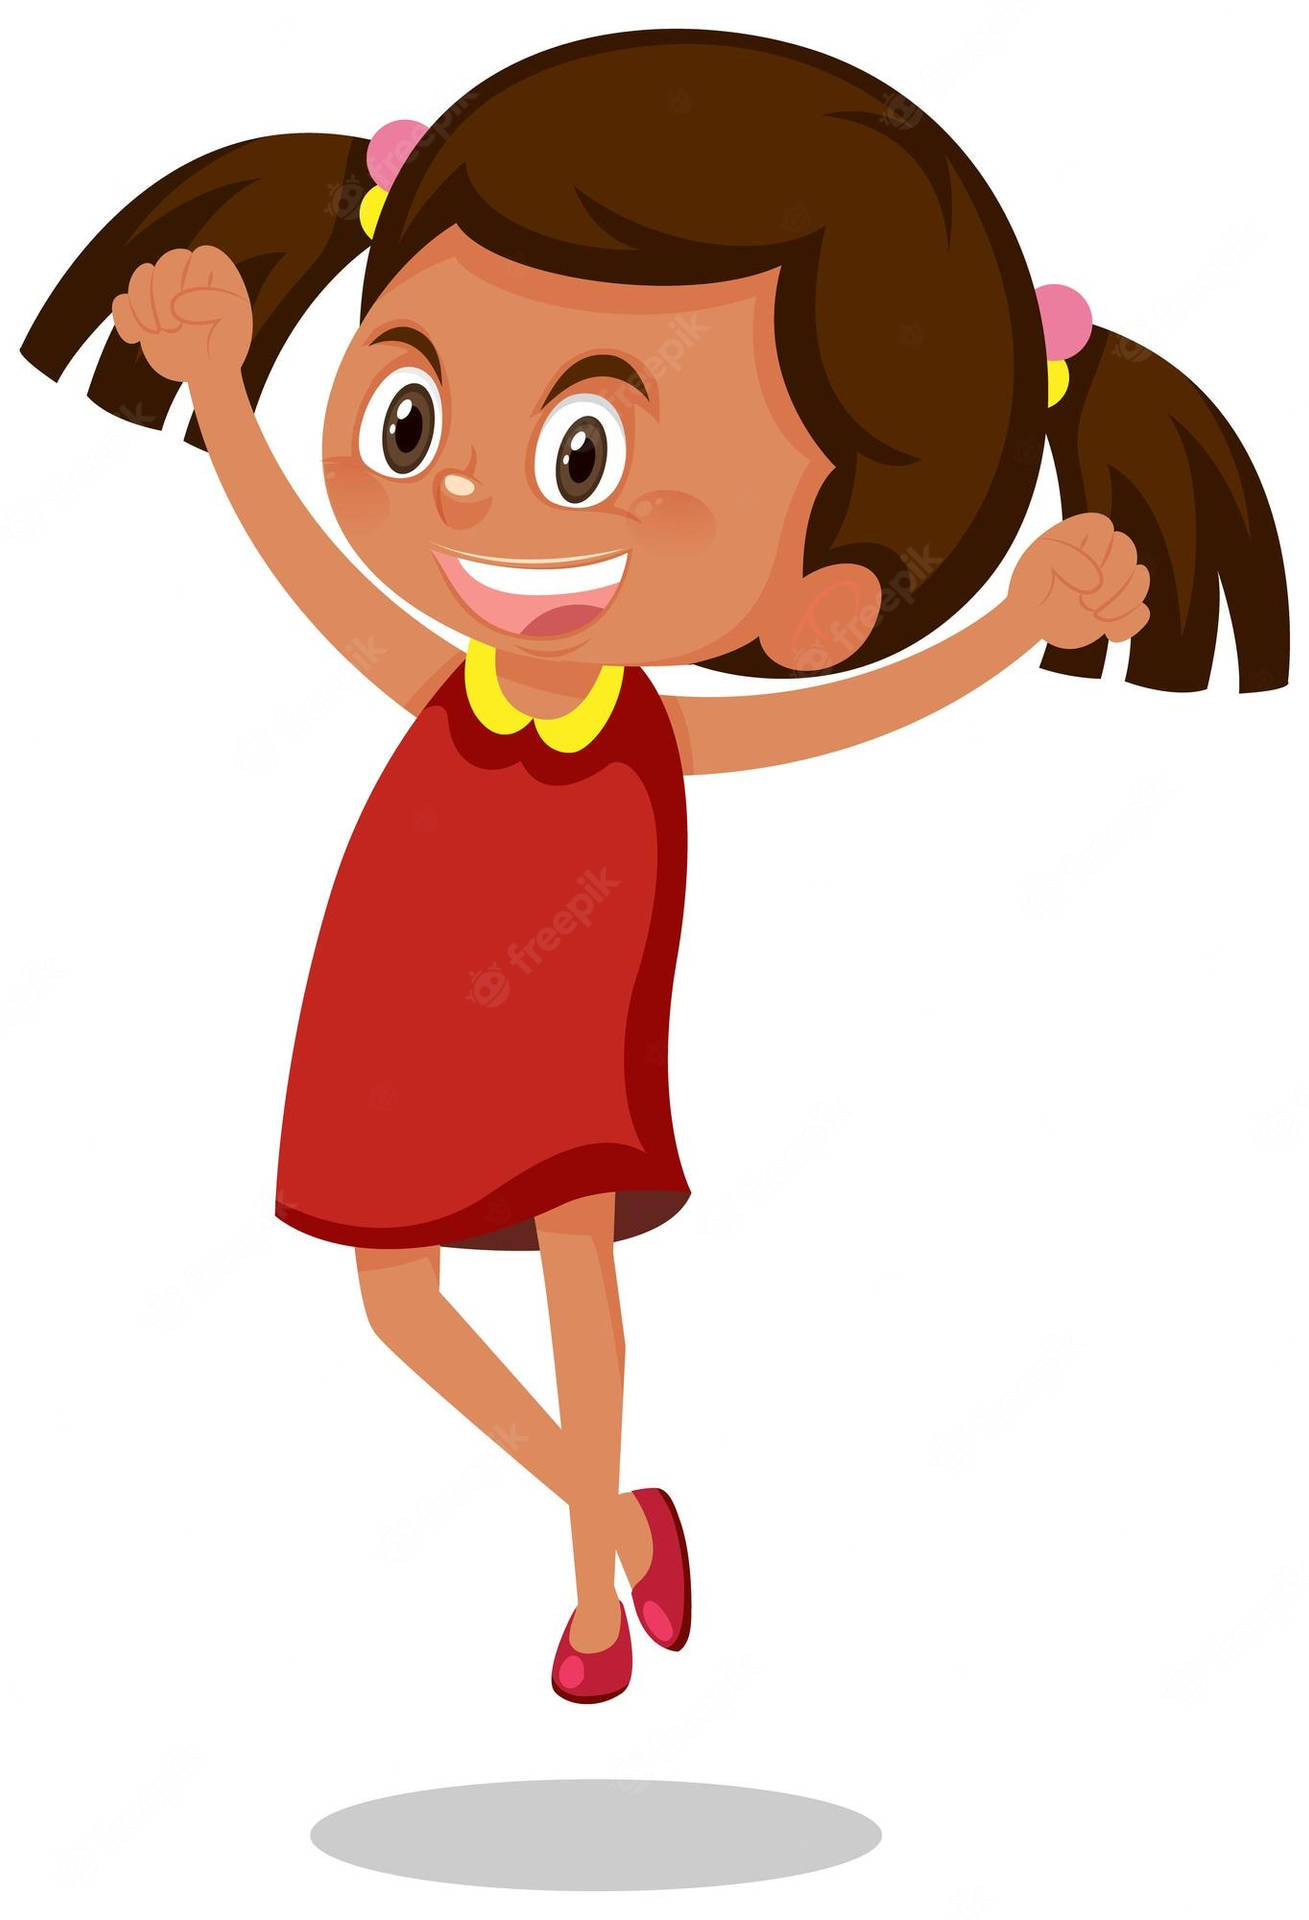 Excited Child With Hands Raised Background